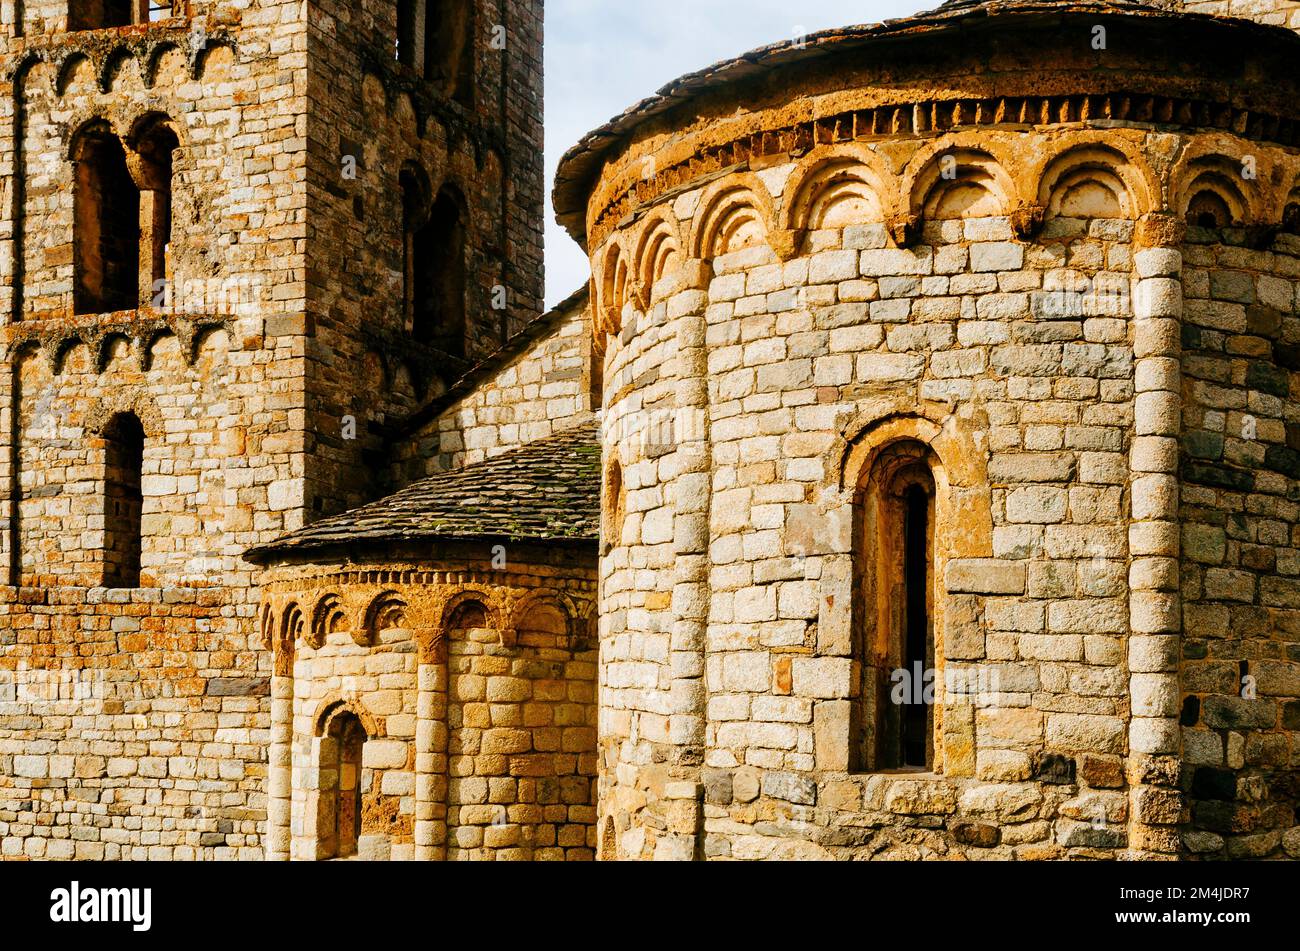 Detail of the apse. Sant Climent de Taüll, also known as the Church of St. Clement of Tahull, is a Roman Catholic church in Catalonia. It is an exampl Stock Photo